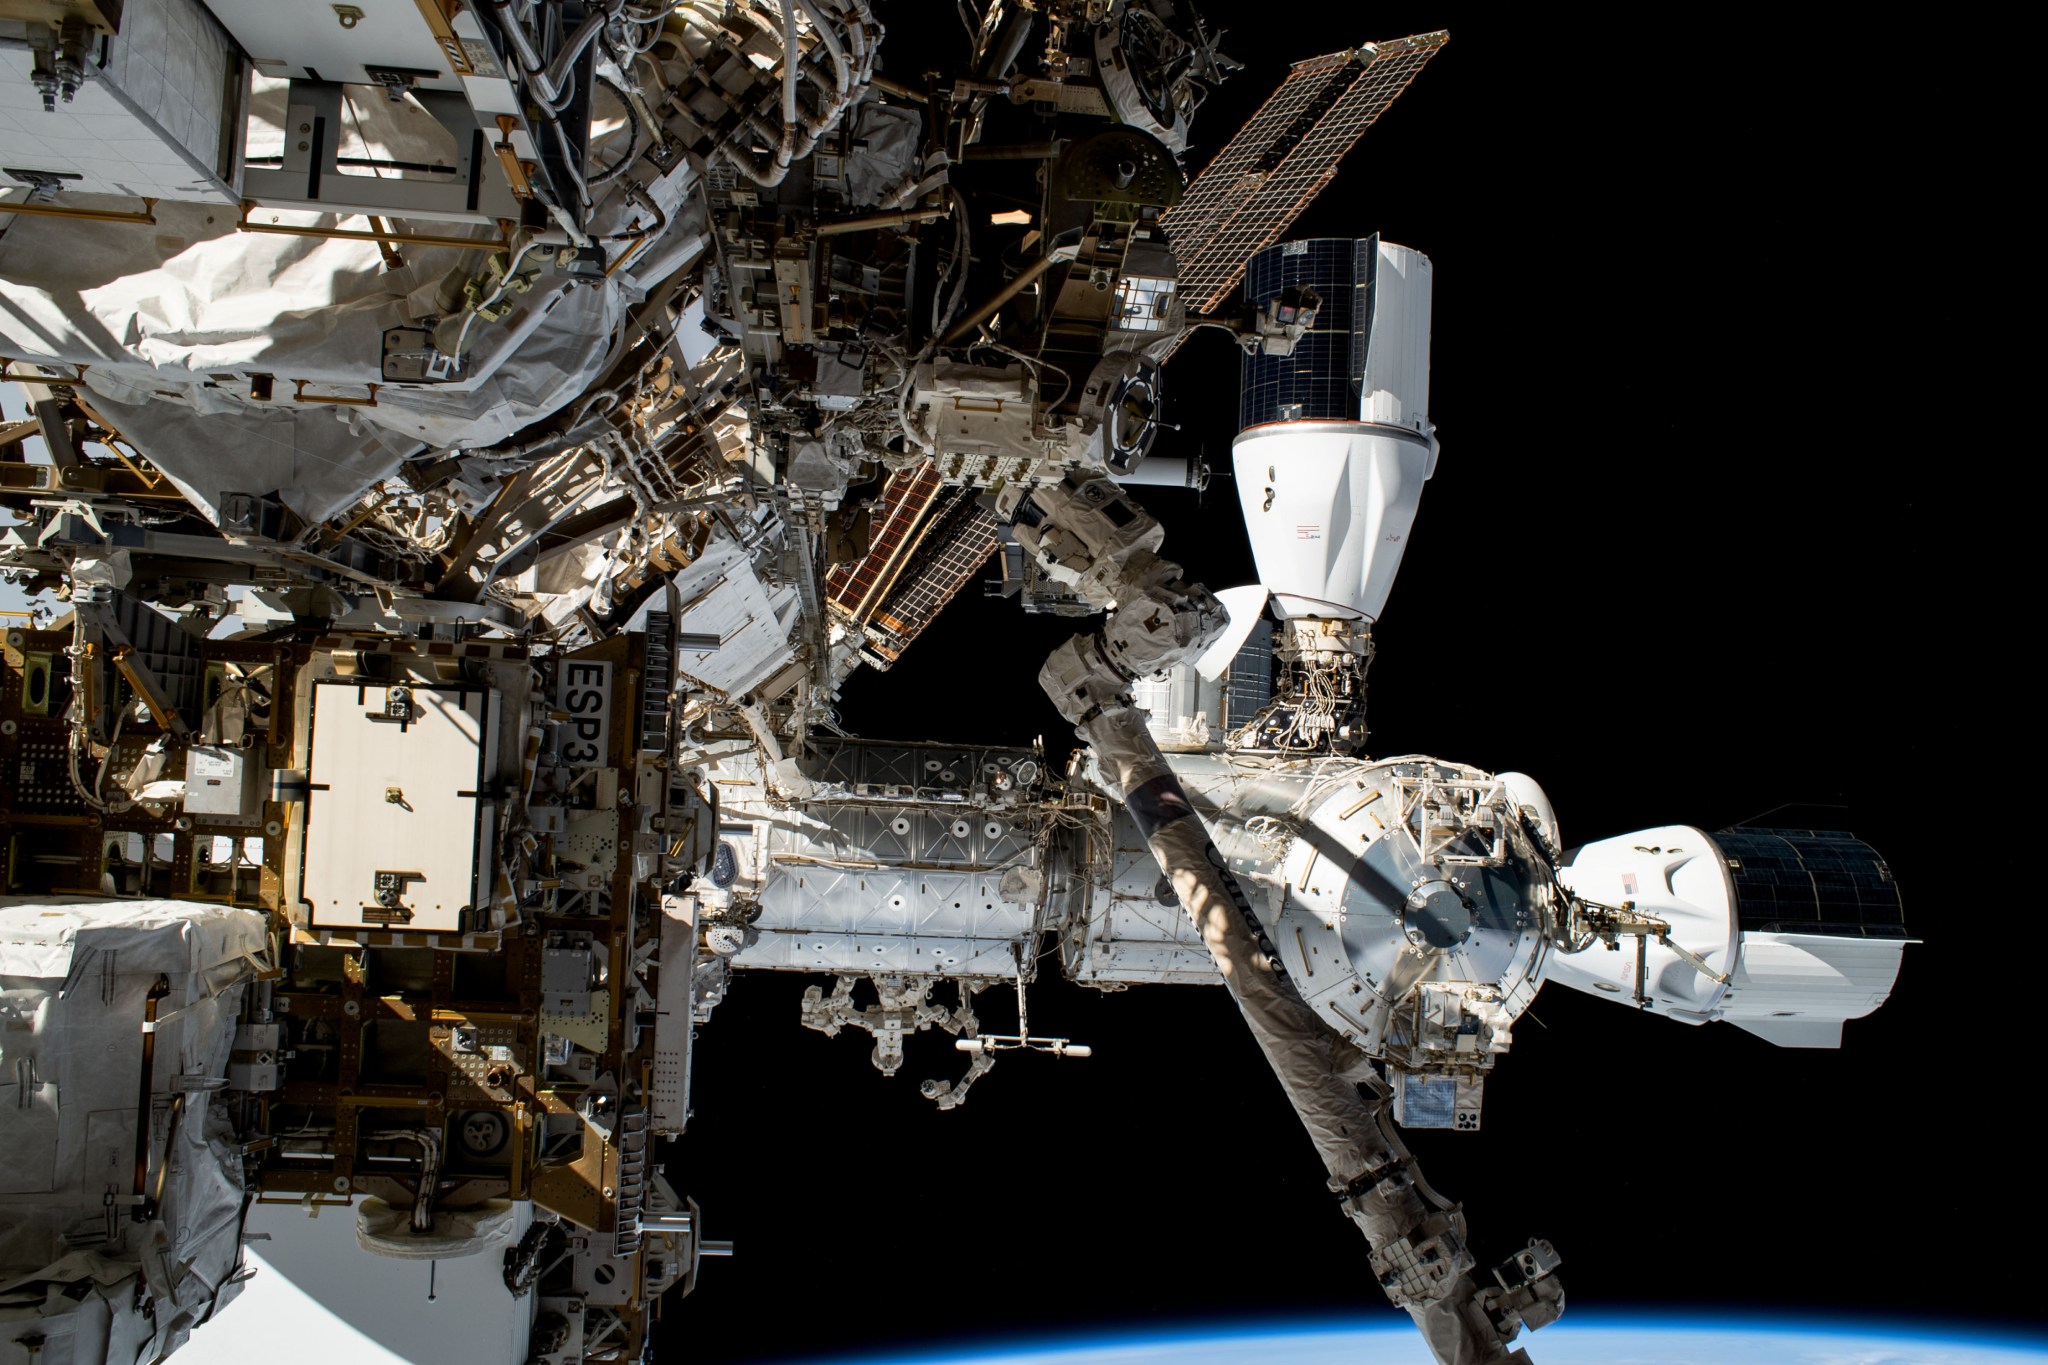 Two SpaceX Dragon vehicles are pictured docked to the International Space Station's Harmony module in this photograph taken from NASA astronaut Woody Hoburg's camera during a six-hour and three-minute spacewalk. At top, is the Dragon cargo vehicle that docked to Harmony's space-facing port on June 6 with over 7,000 pounds of science experiments, crew supplies, and station hardware. At right, is the Dragon crew vehicle that docked to Harmony's forward port on March 3 carrying four SpaceX Crew-6 crew members.